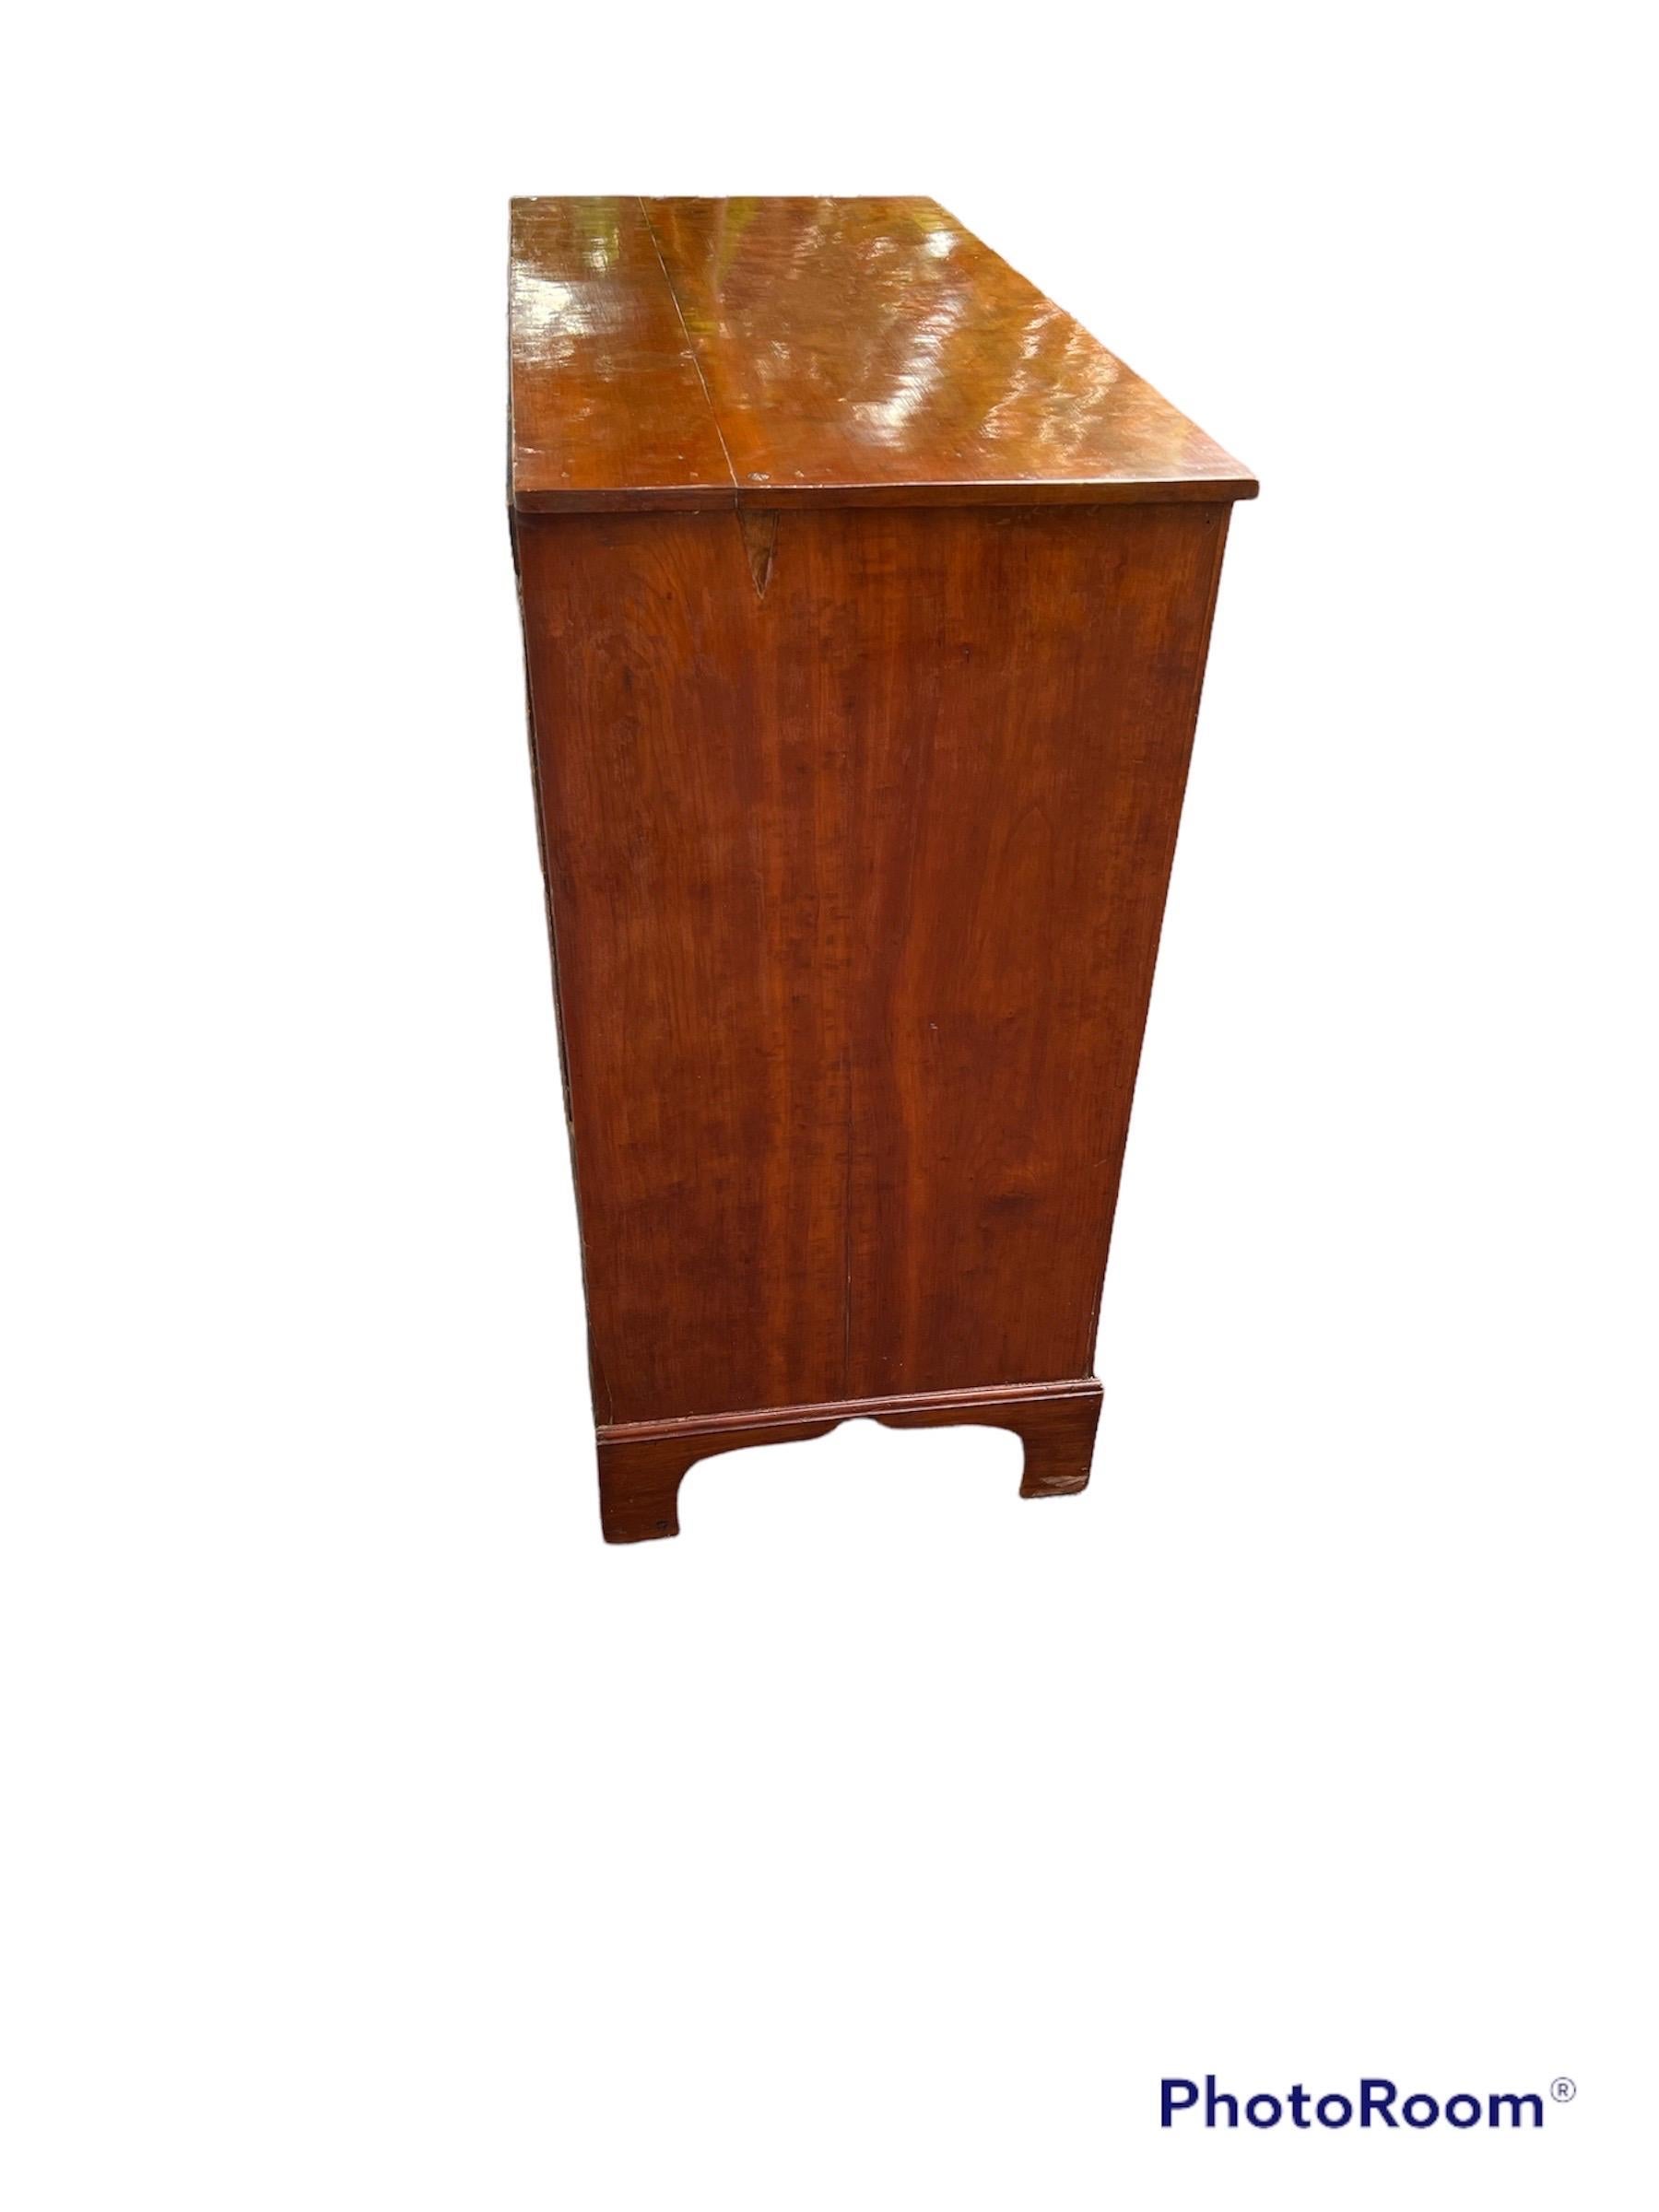 American Classical American Cherry Wood Chest of Drawers 